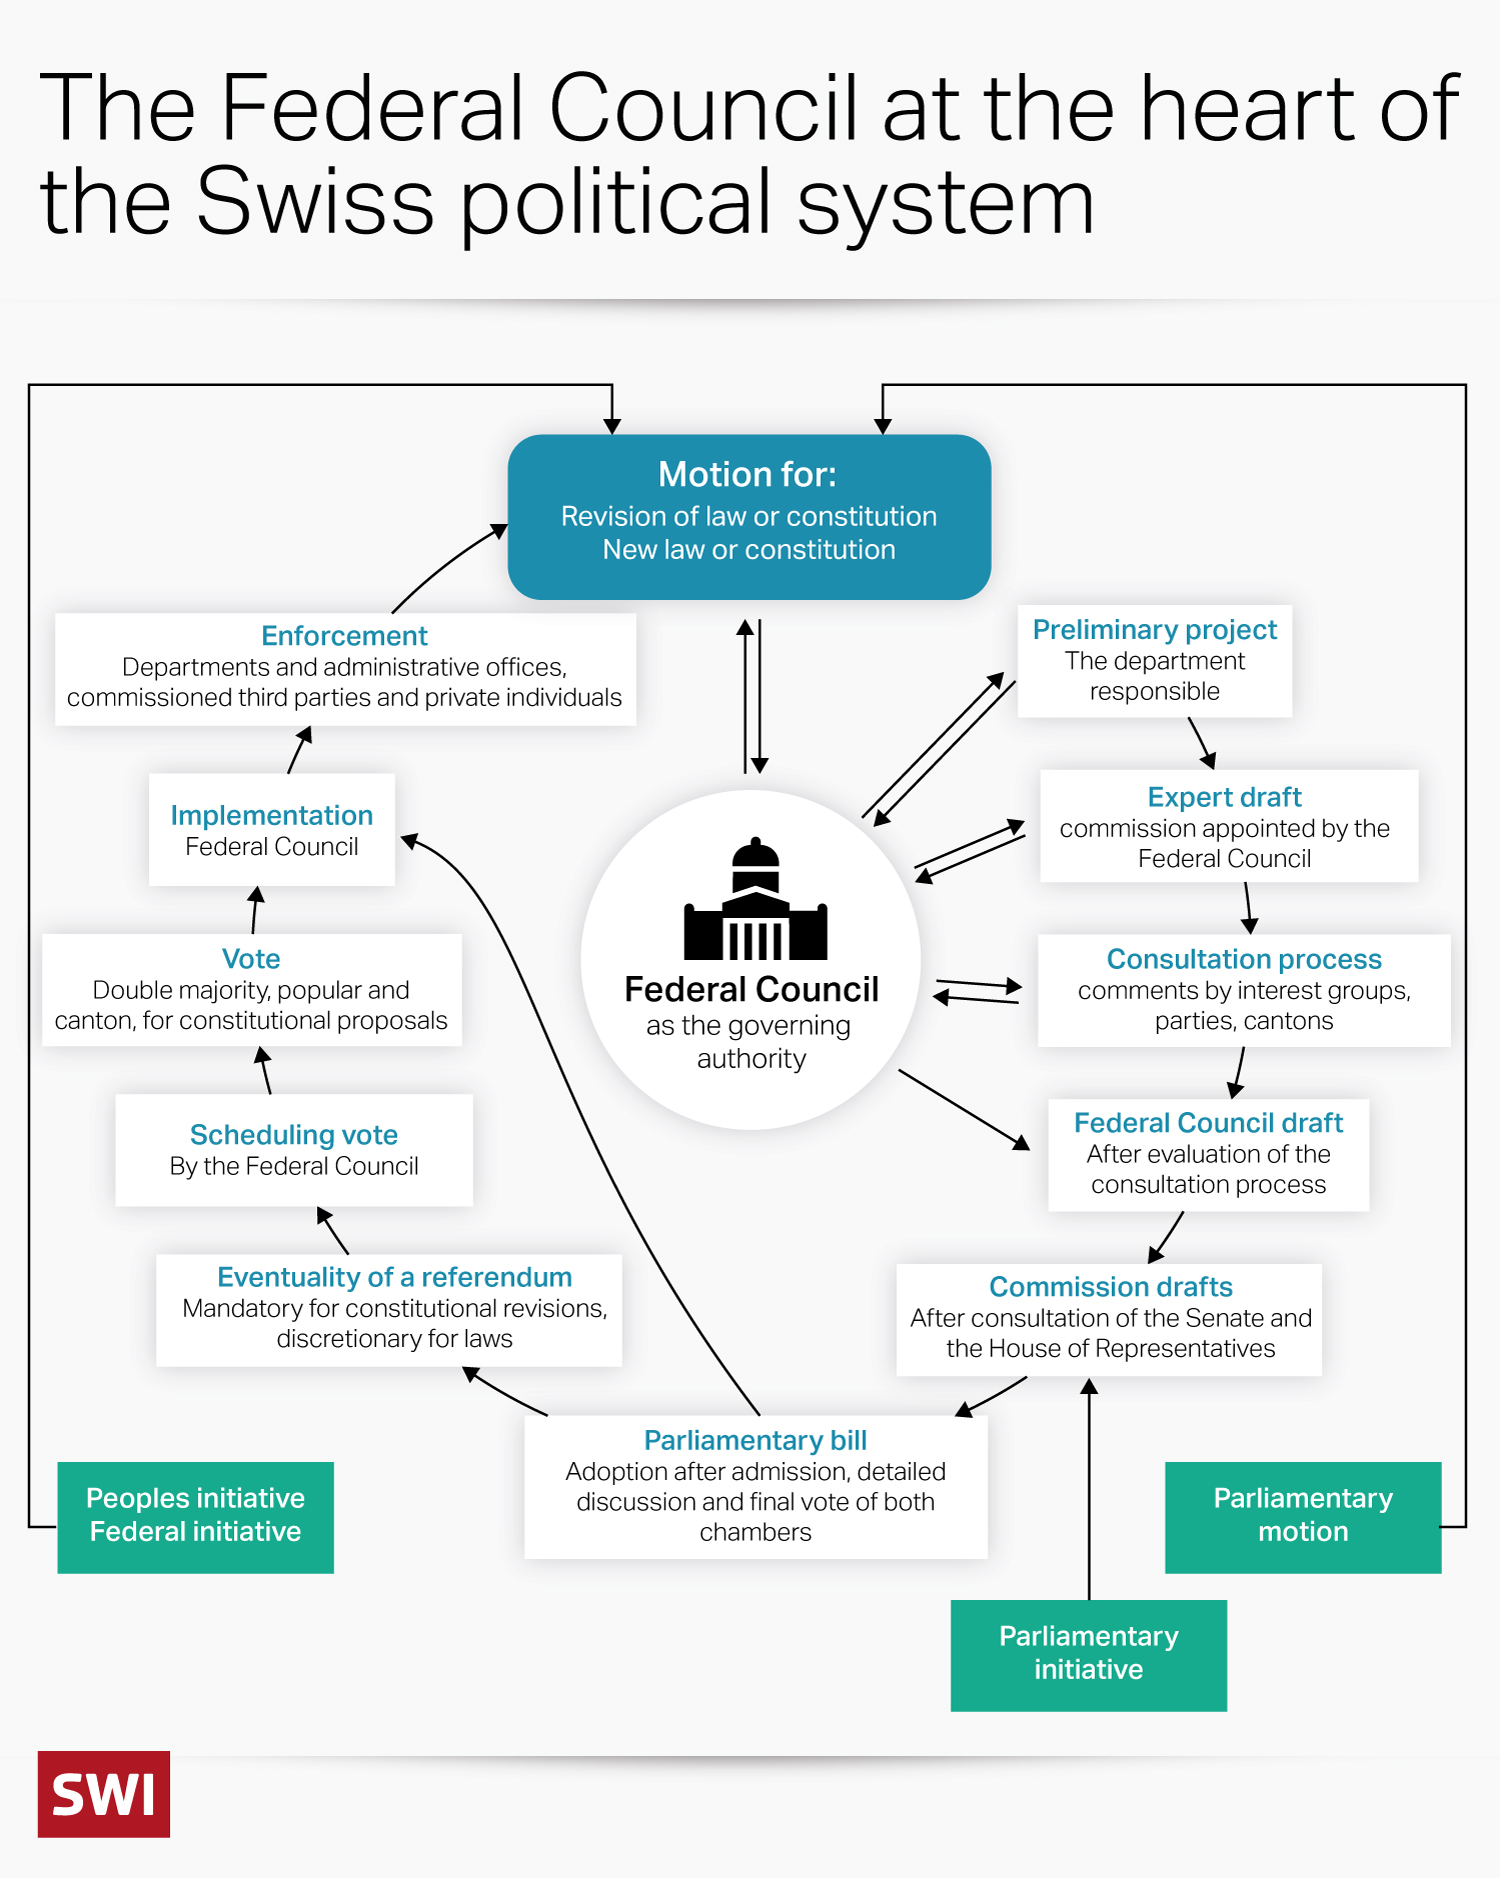 Chart on the government’s central role in the political system